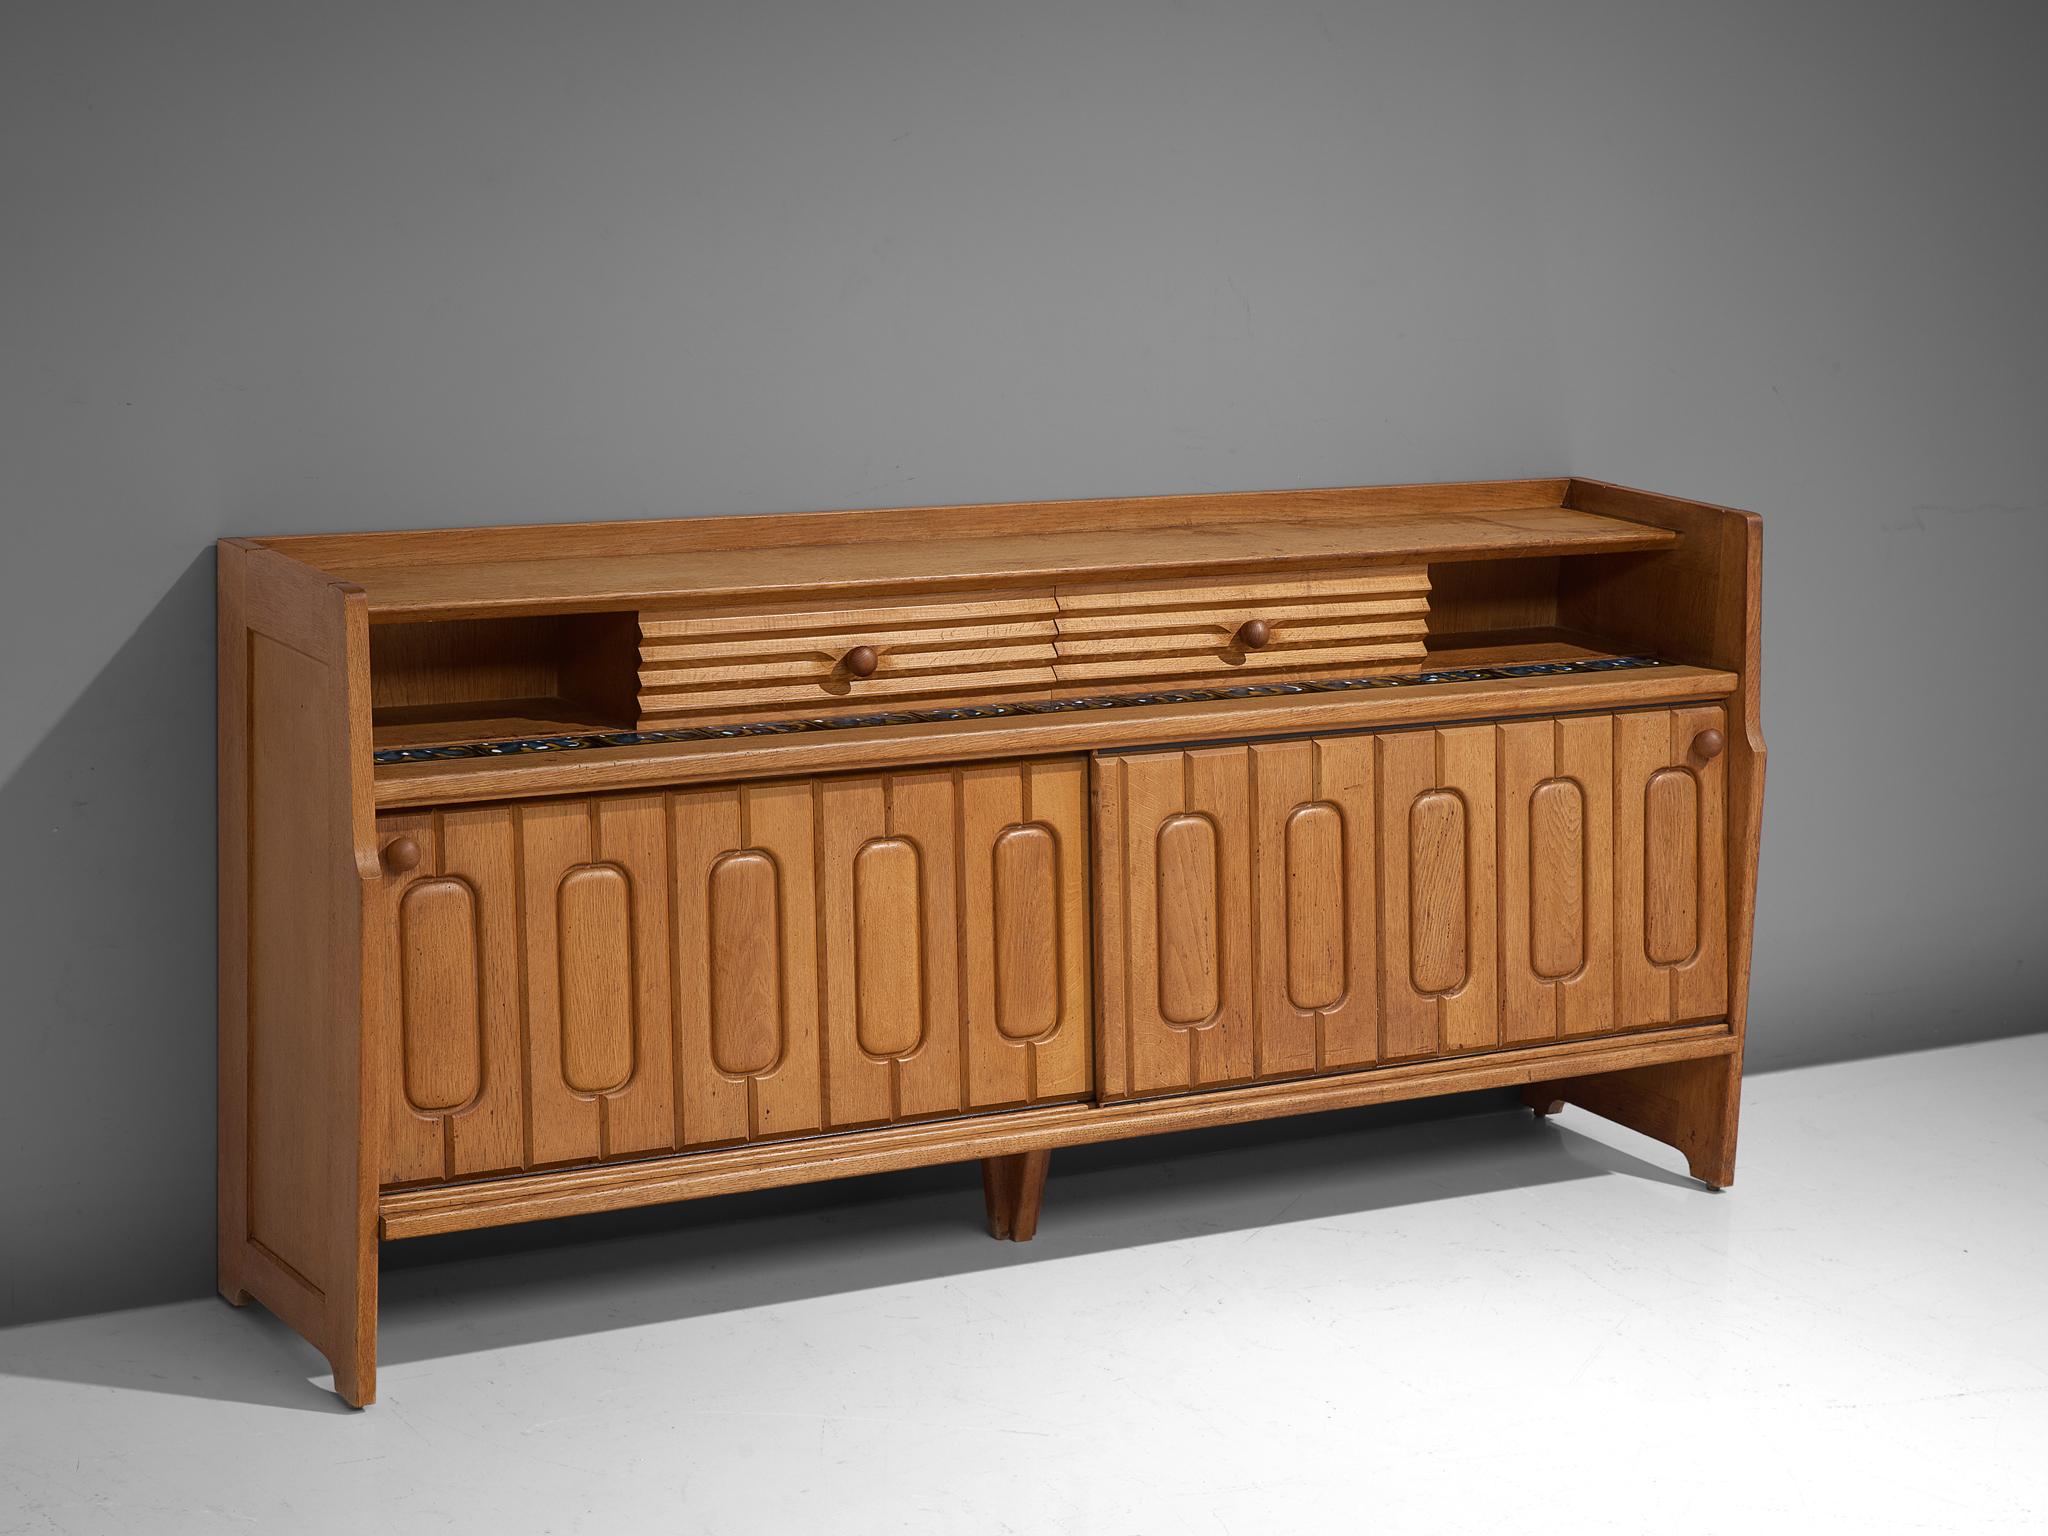 Guillerme & Chambron Sideboard in Oak and Ceramic